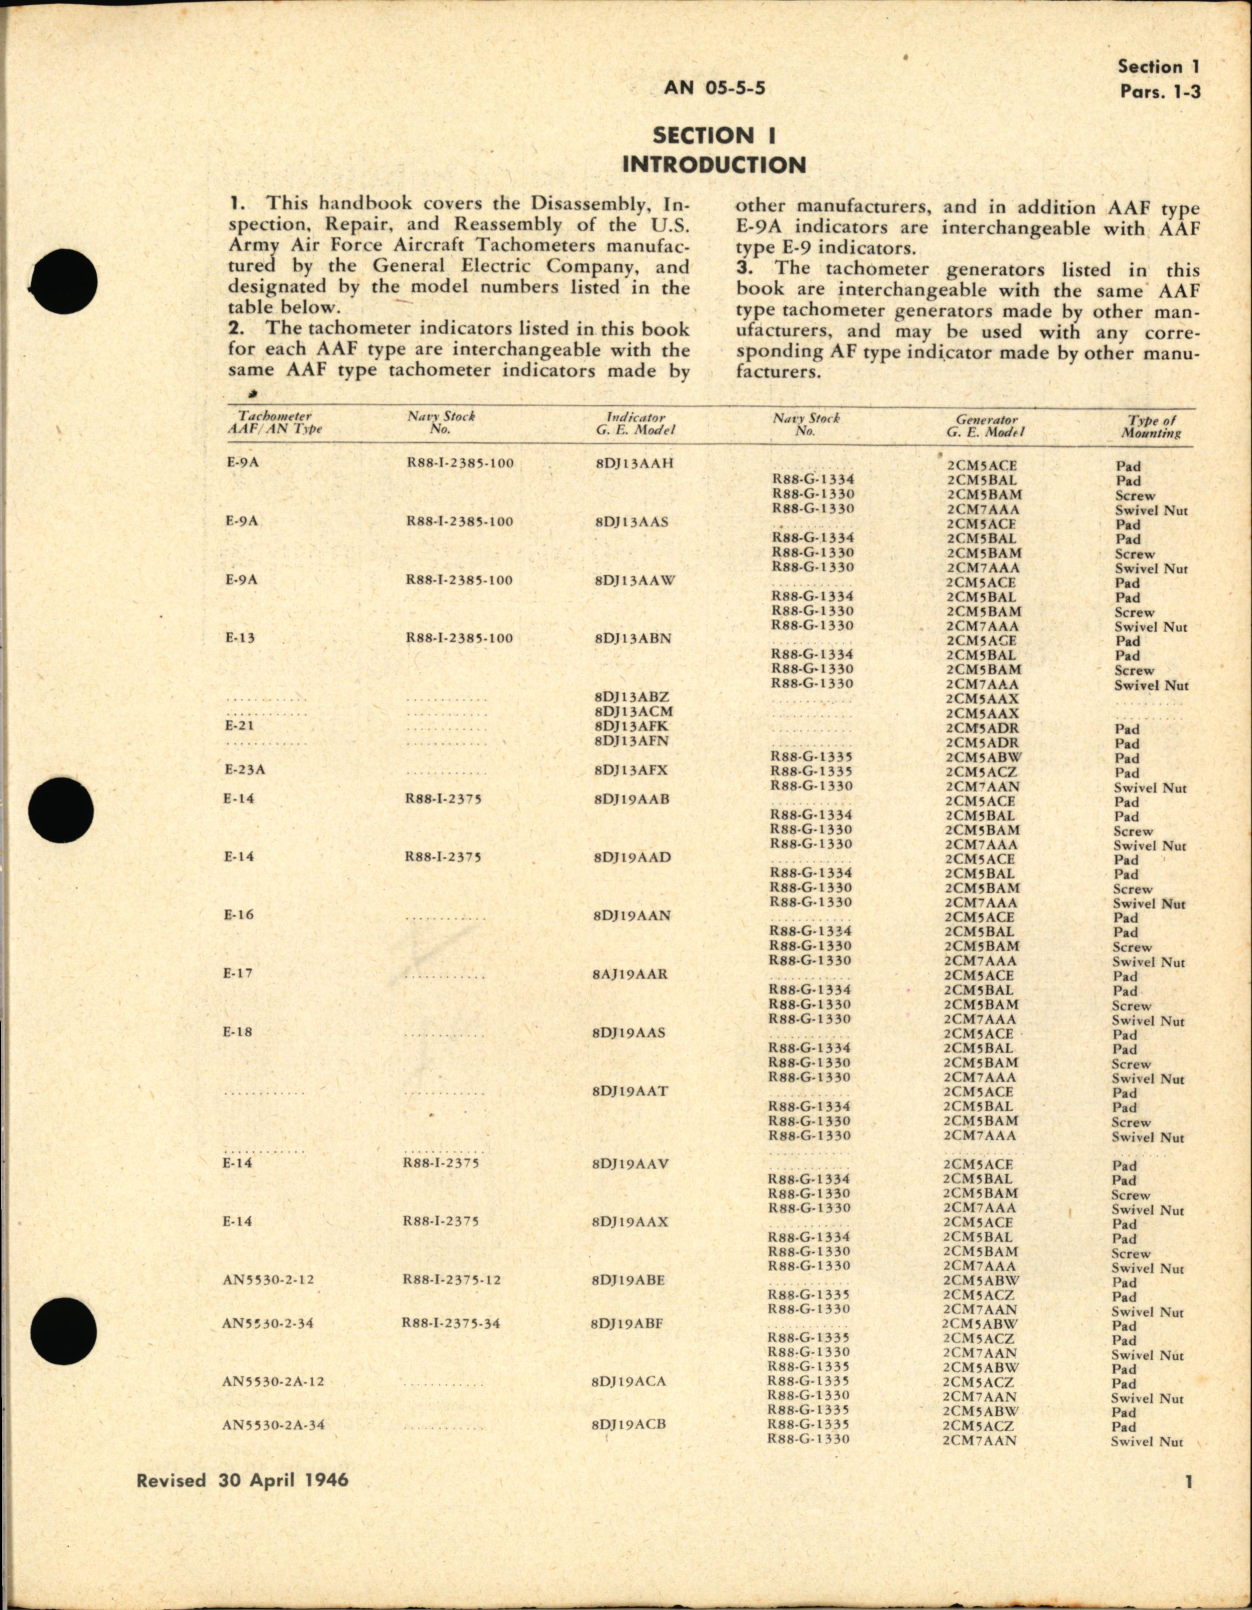 Sample page 7 from AirCorps Library document: Overhaul Instructions for Electric Tachometers